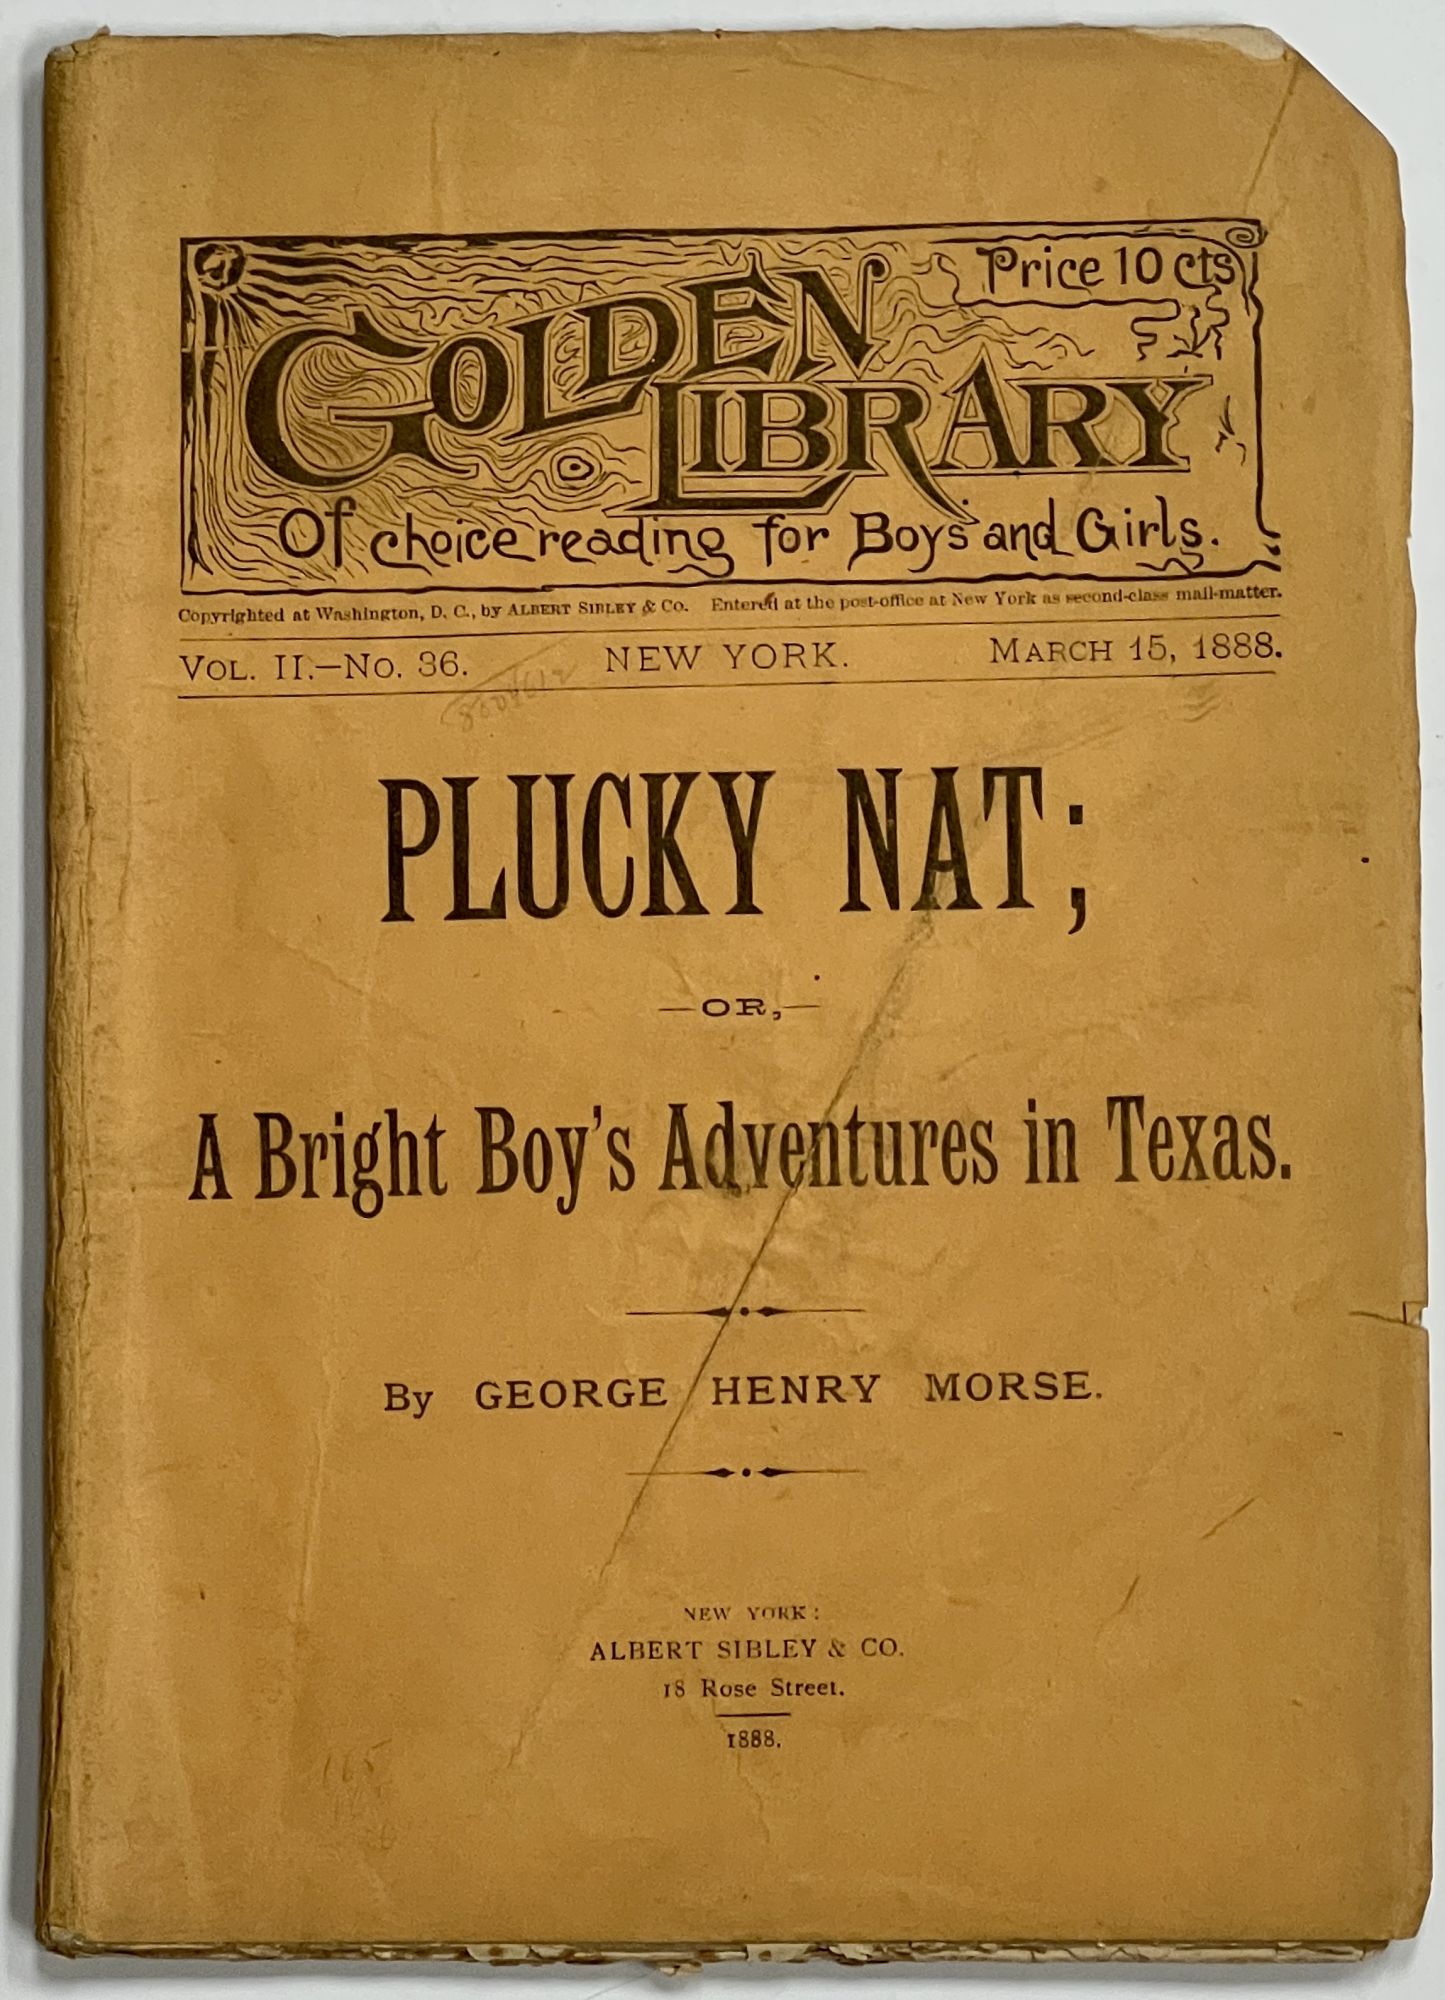 Morse, George Henry - PLUCKY NAT; or, A Bright Boy's Adventures in Texas Golden Hour Library of Choice Reading for Boys and Girls. Vol. II. - No. 36. March 15, 1888